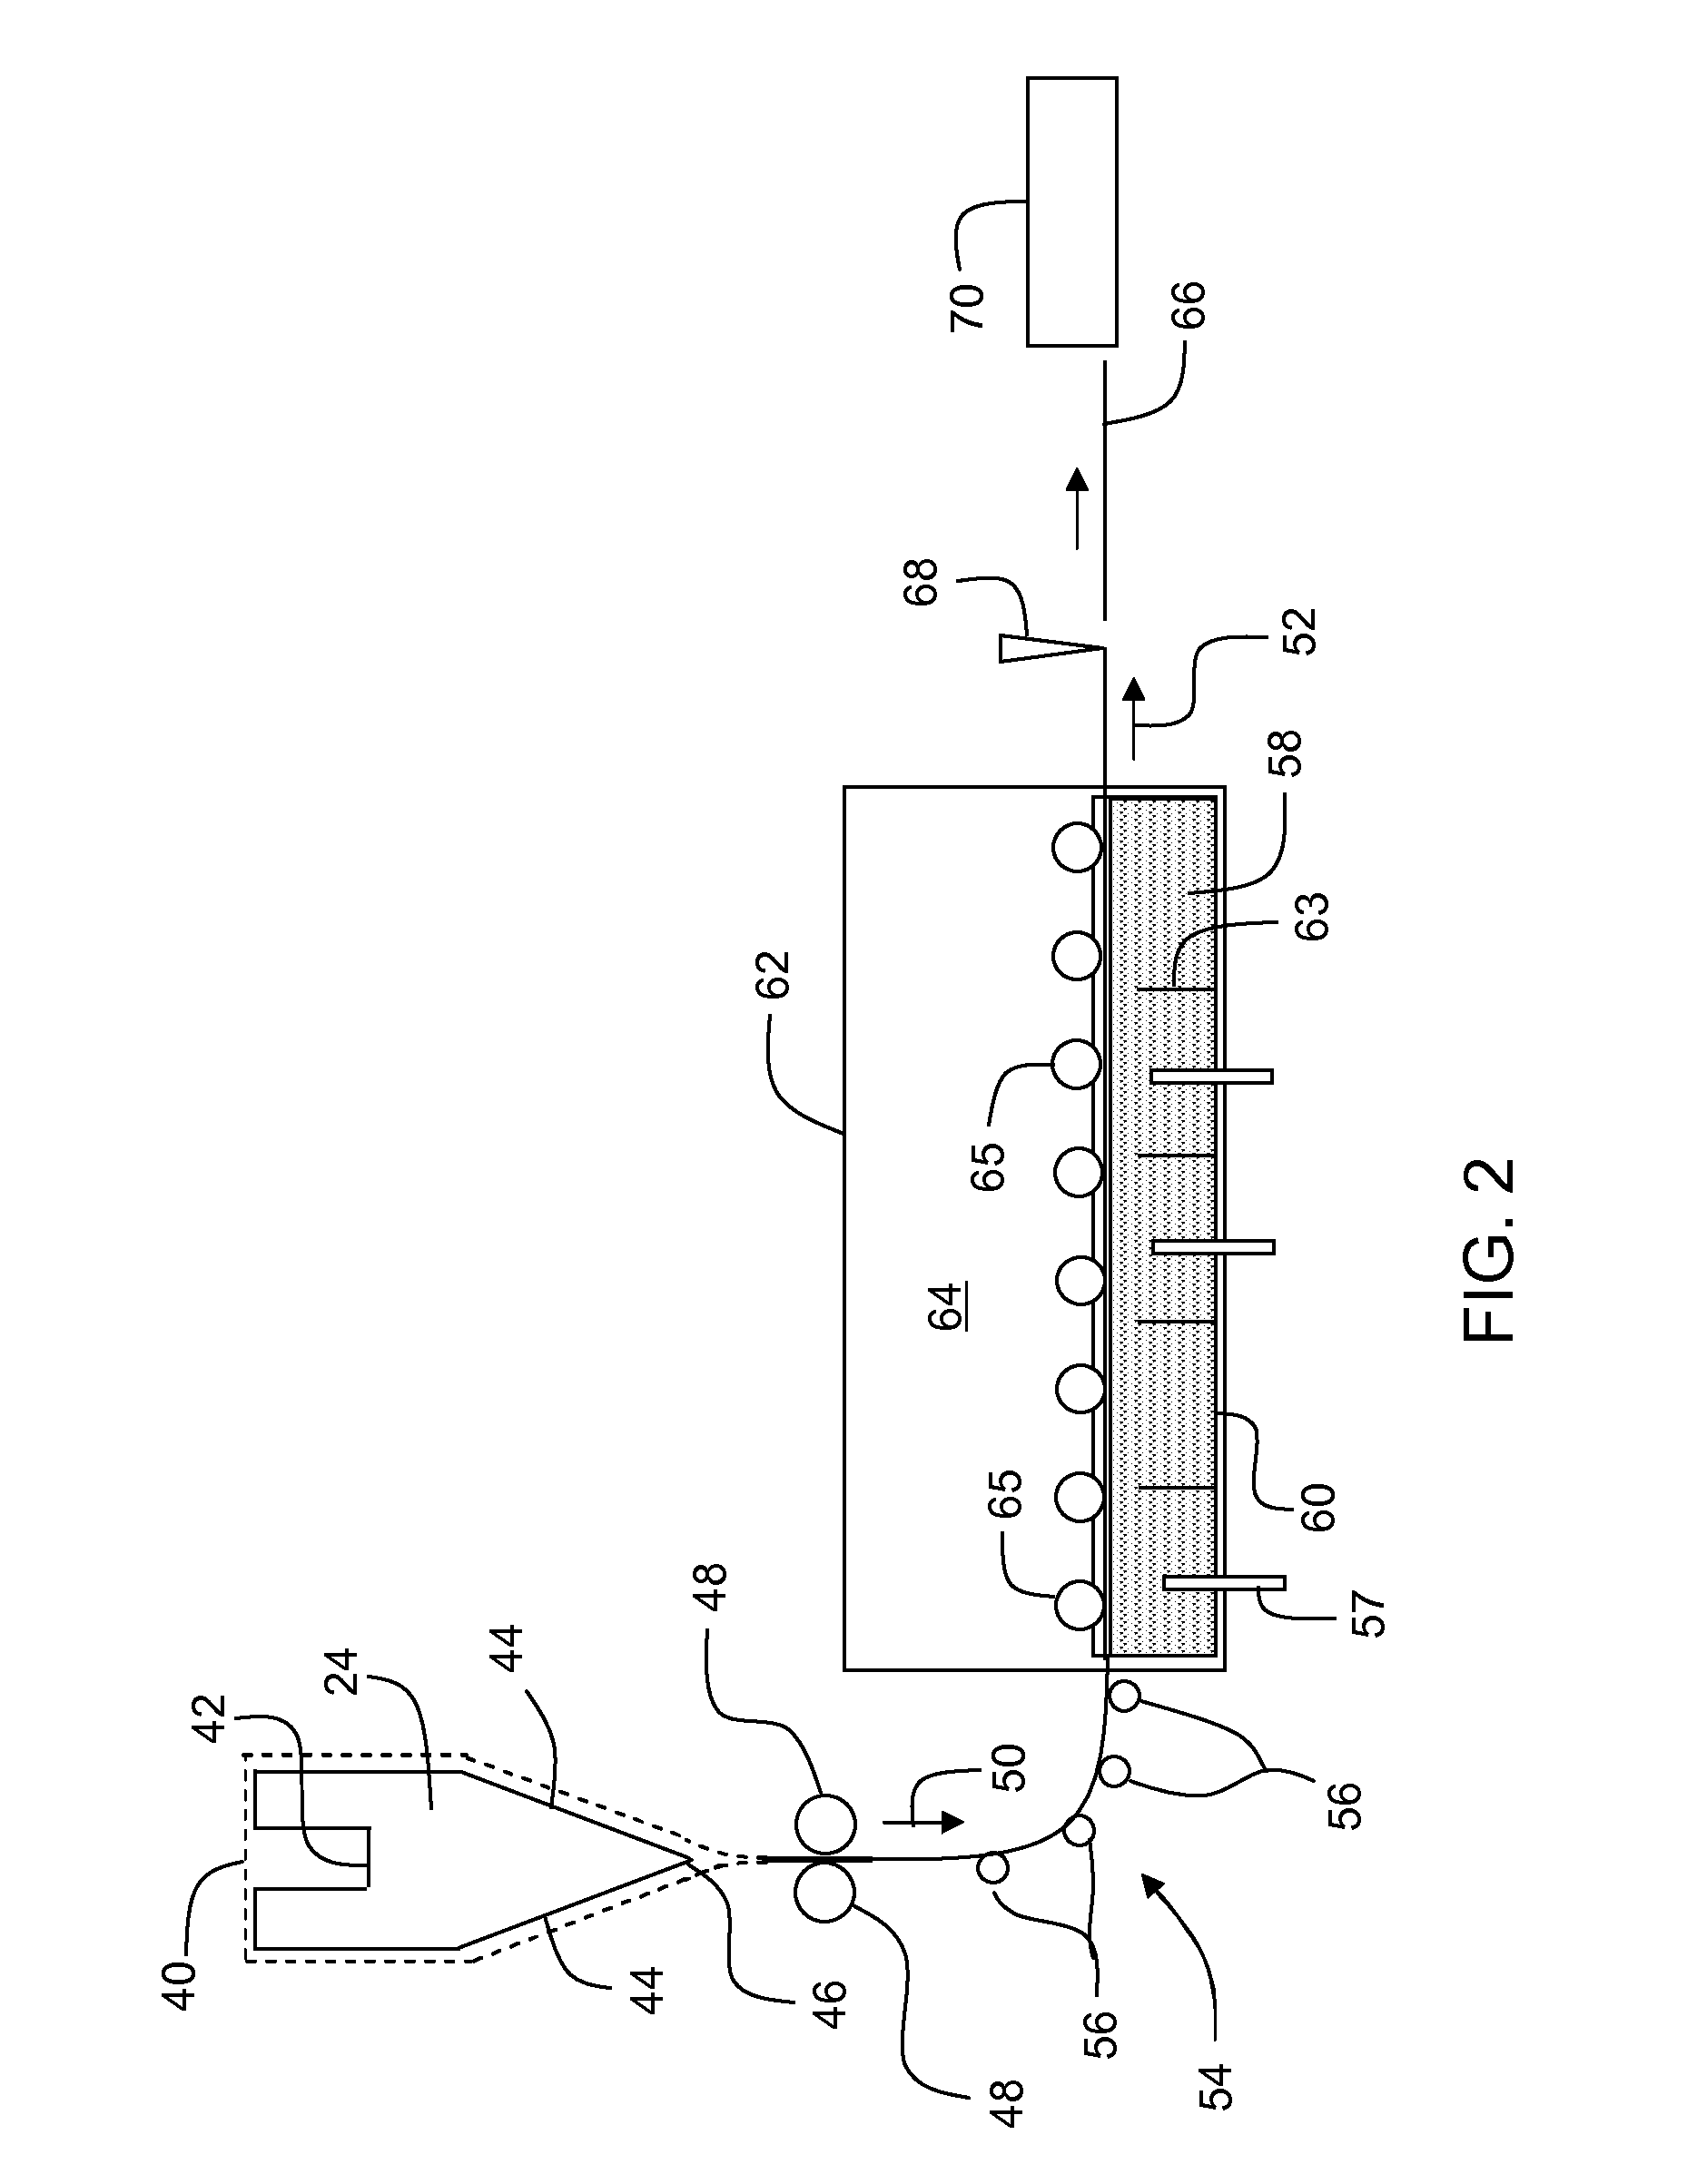 Apparatus and method for forming glass sheets